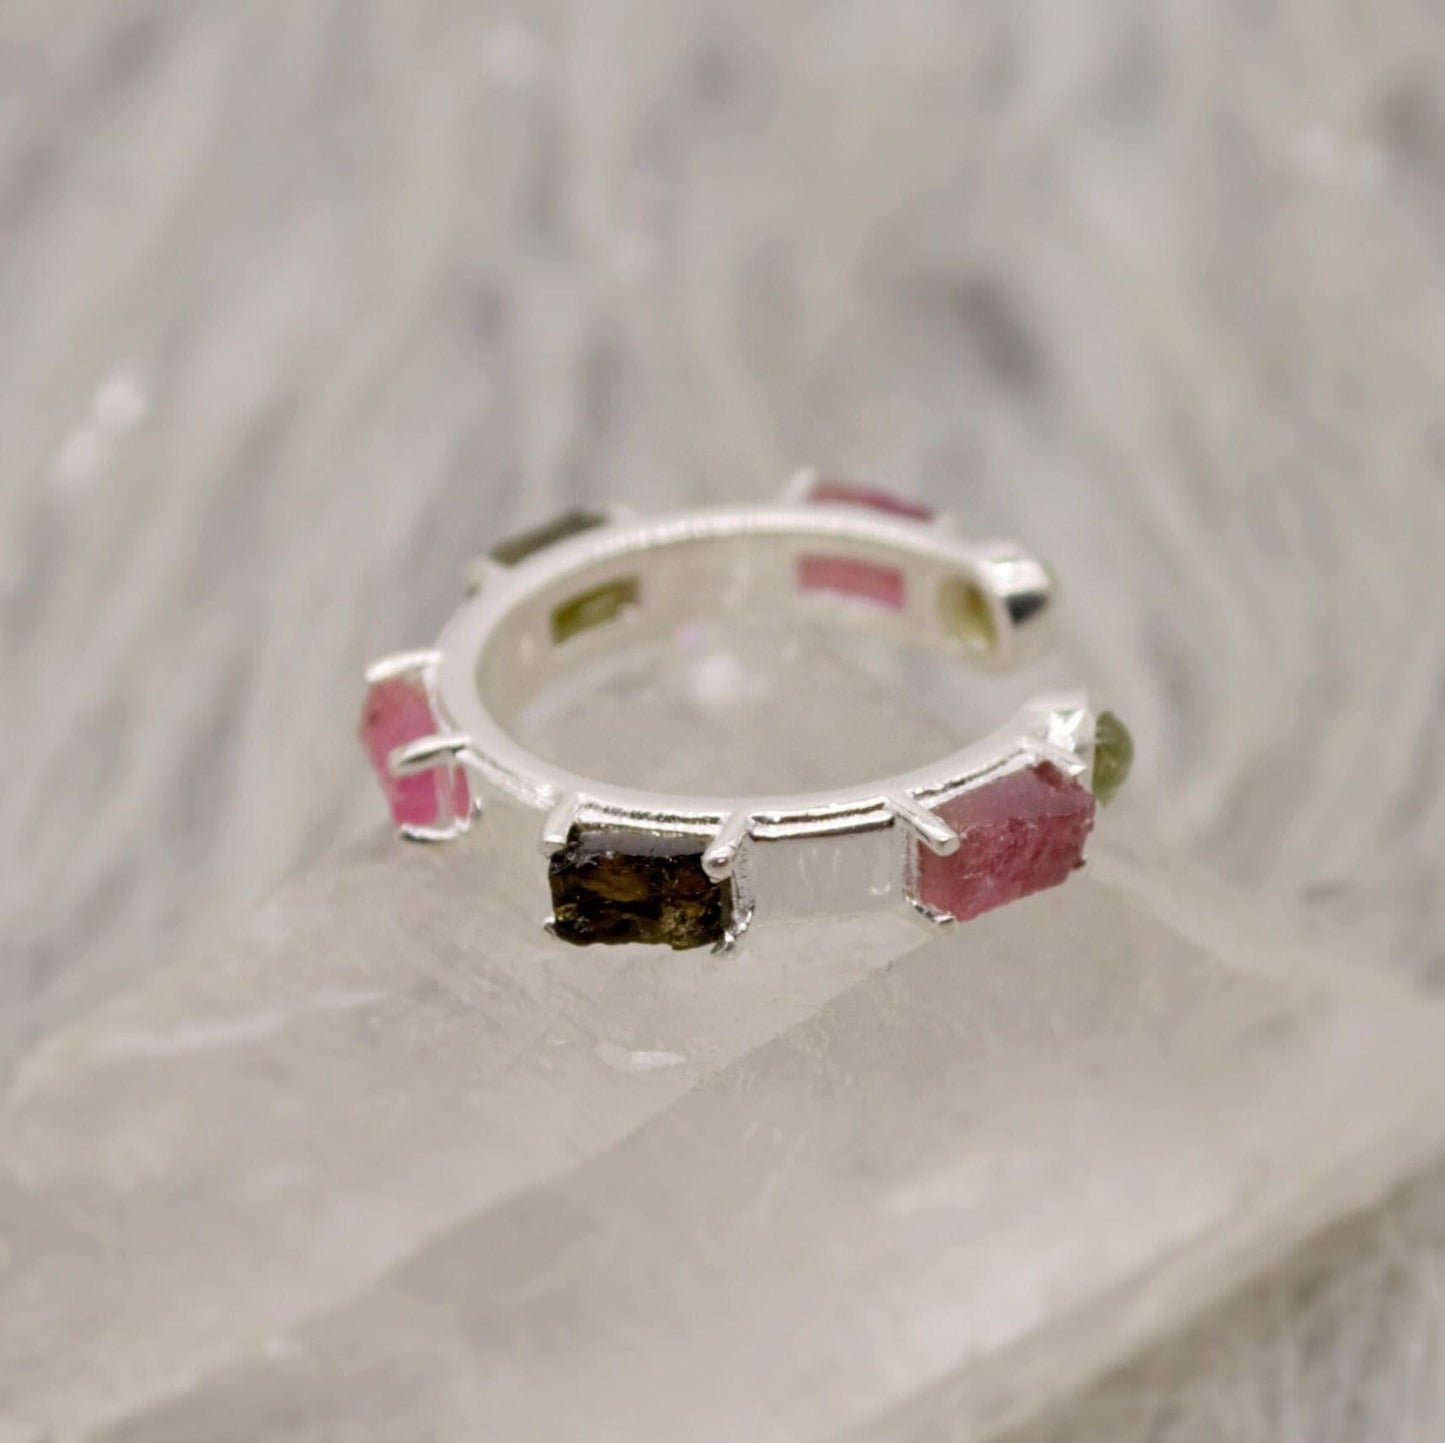 Pink, Black Tourmaline Ring, Tourmaline Jewelry, October Birthstone Ring, Handmade Sterling Silver Hoop Rings, Unique Gemstone Open Ring